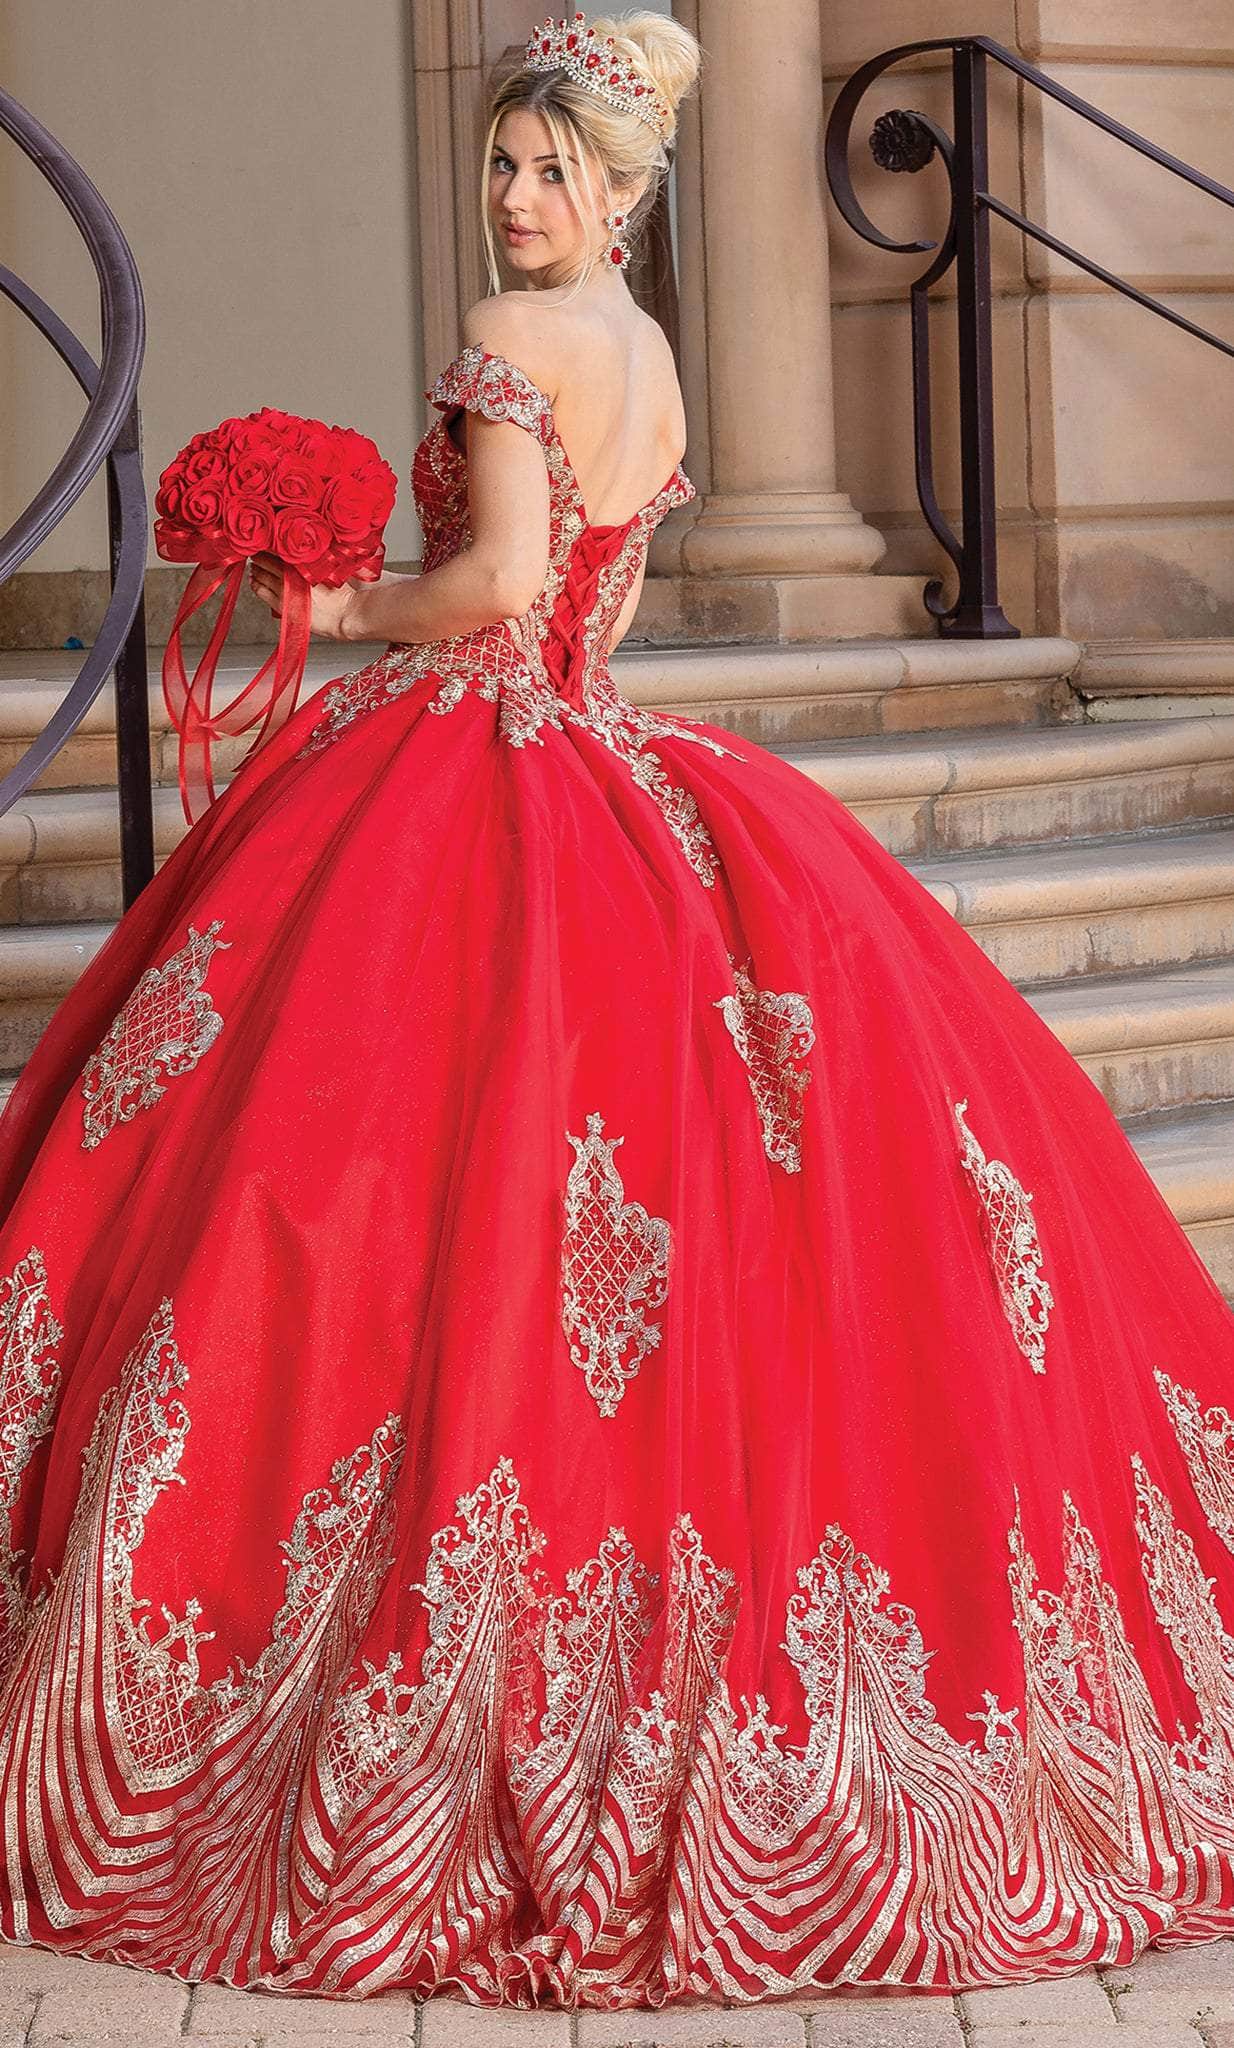 Dancing Queen 1681 - Embroidered Off Shoulder Ballgown Ball Gowns